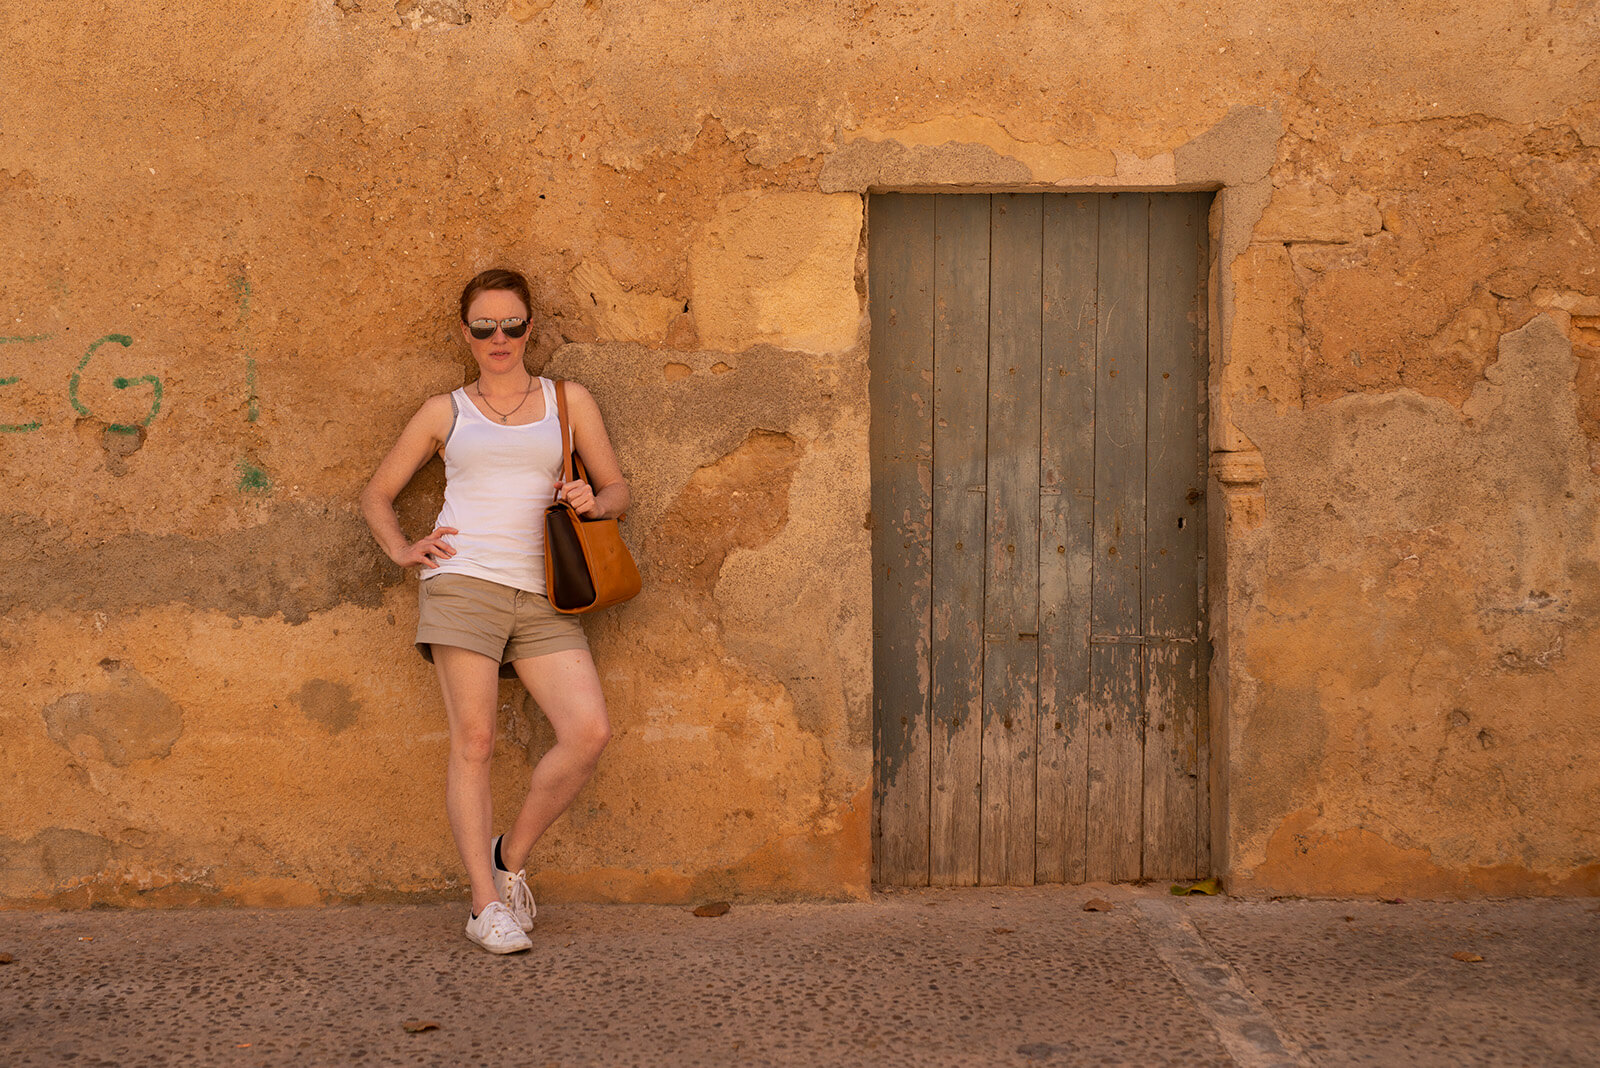 Naturopath, Lisa Fitzgibbon, looking sassy and leaning on a brick wall in Mallorca